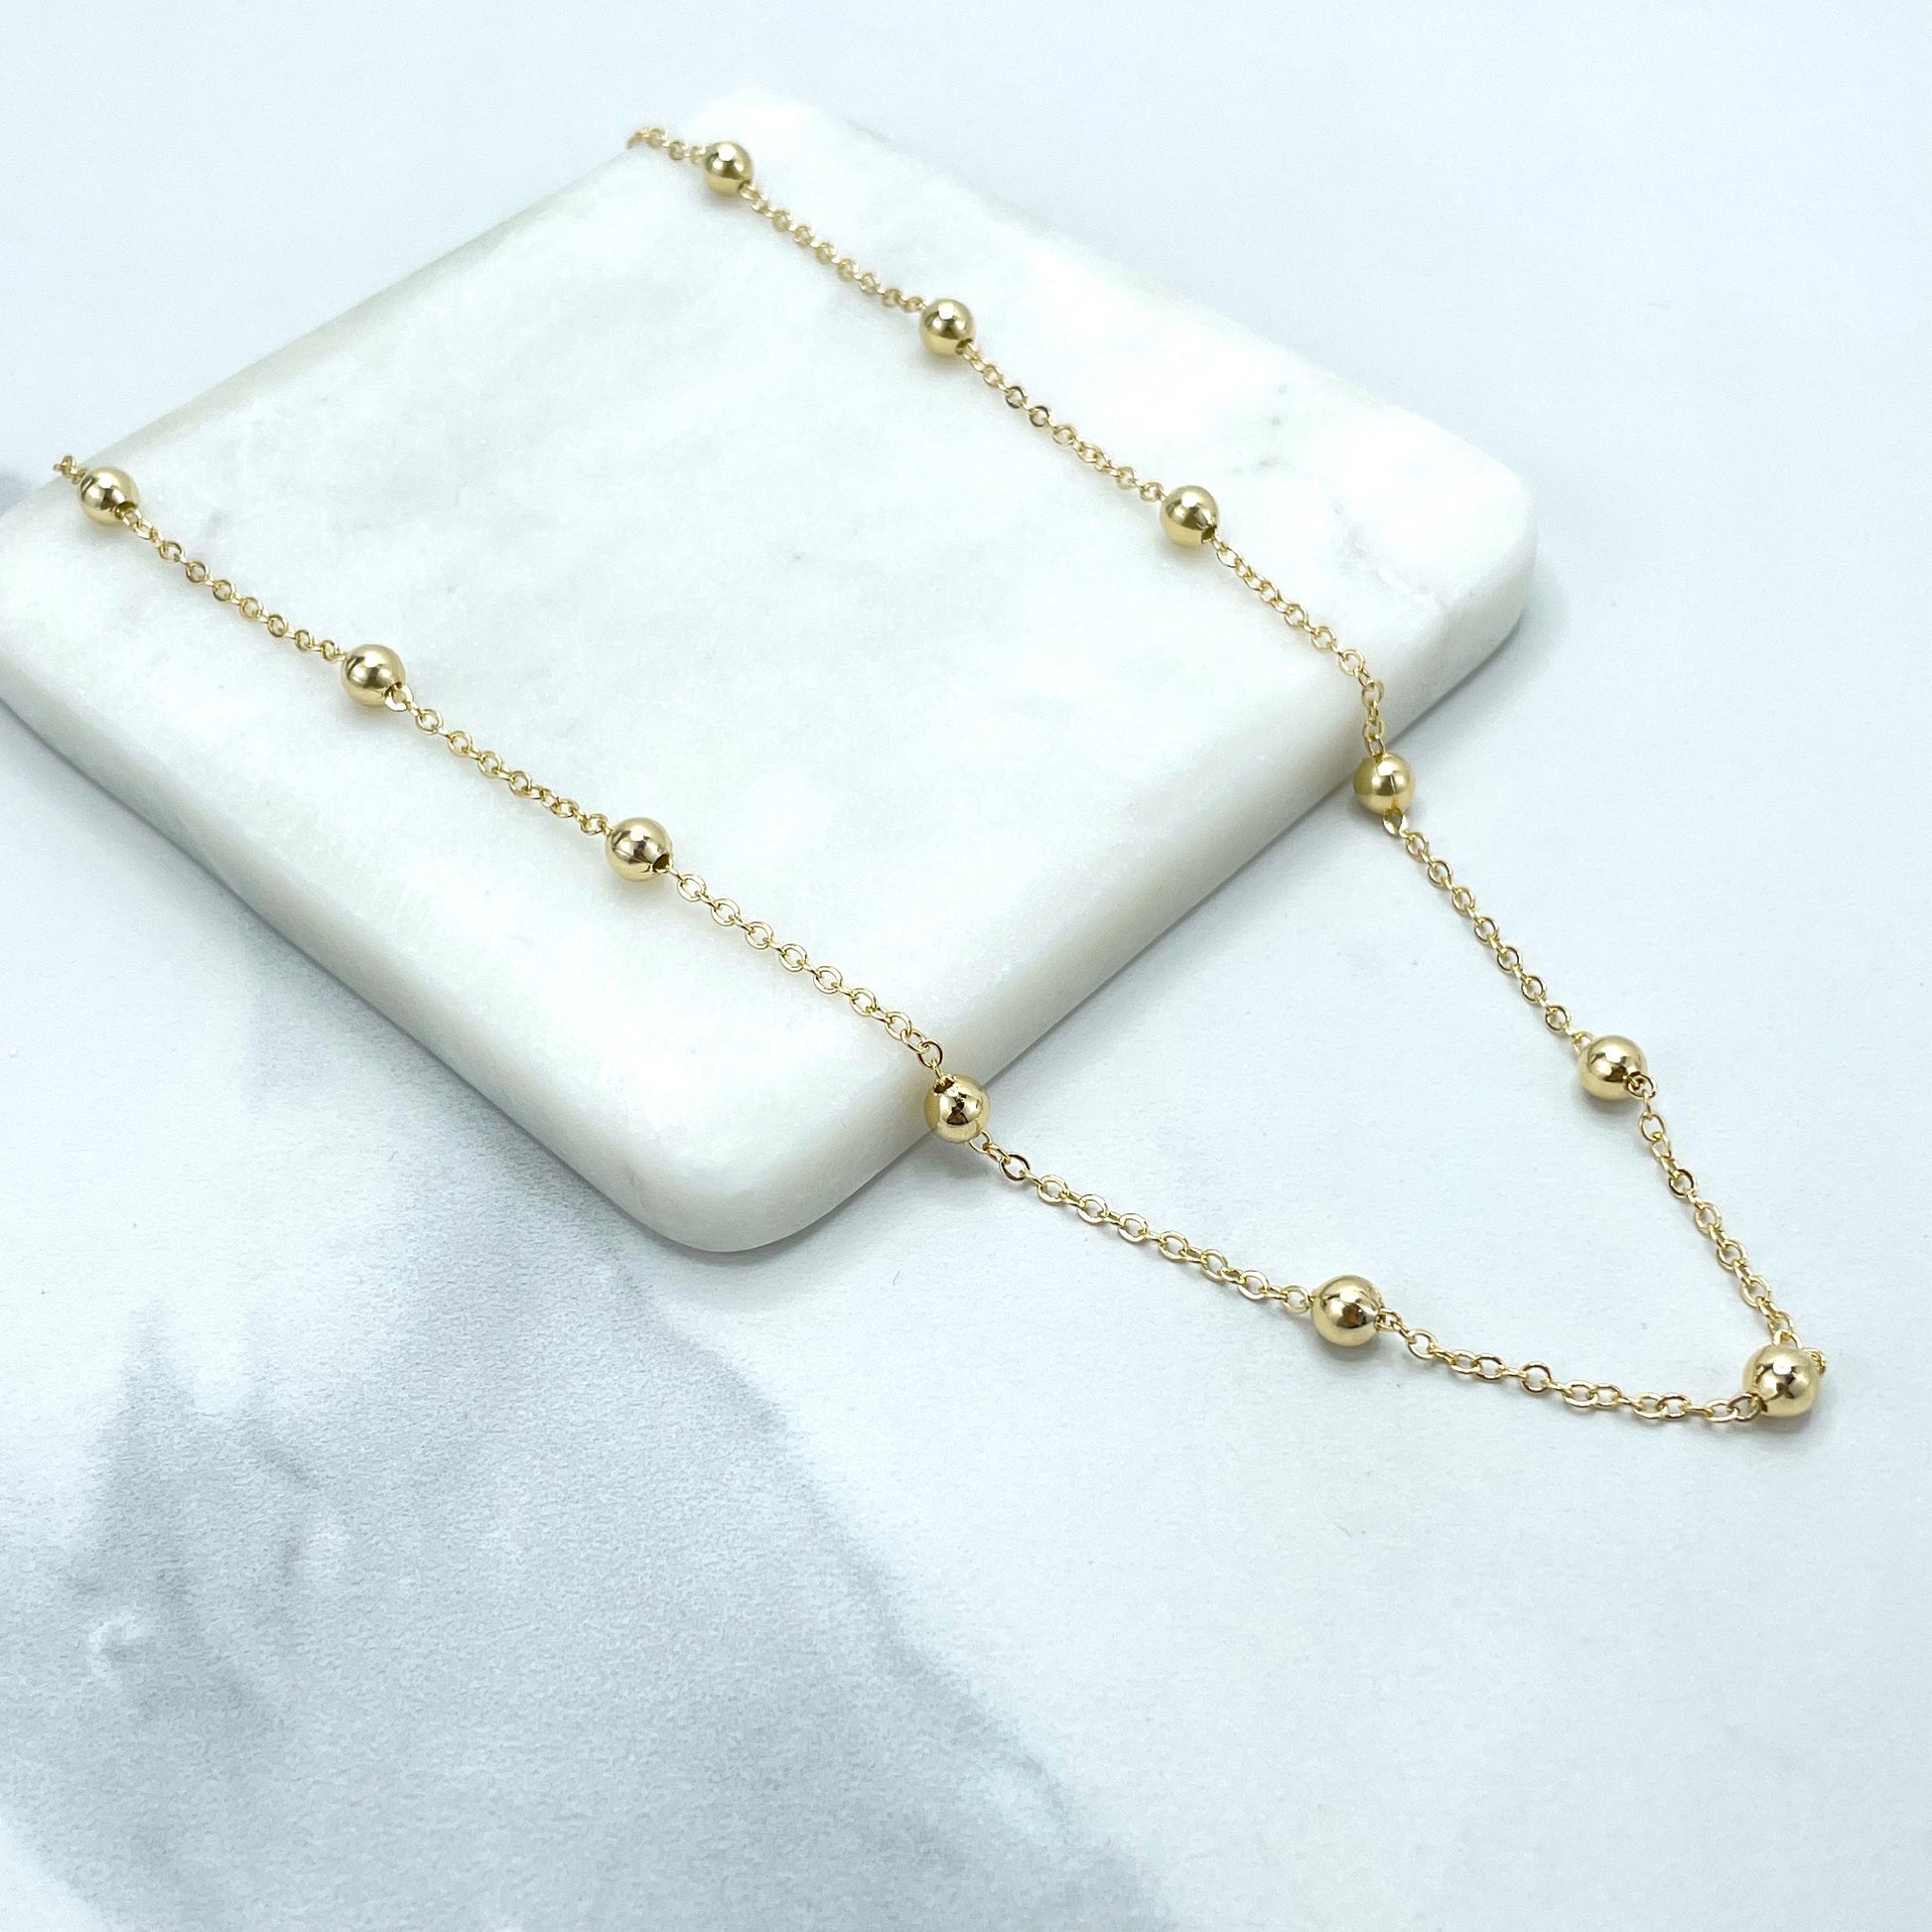 18k Gold filled 2mm Rolo Chain & 5mm Gold Beads Linked Chain Necklace,  Wholesale Jewelry Making Supplies